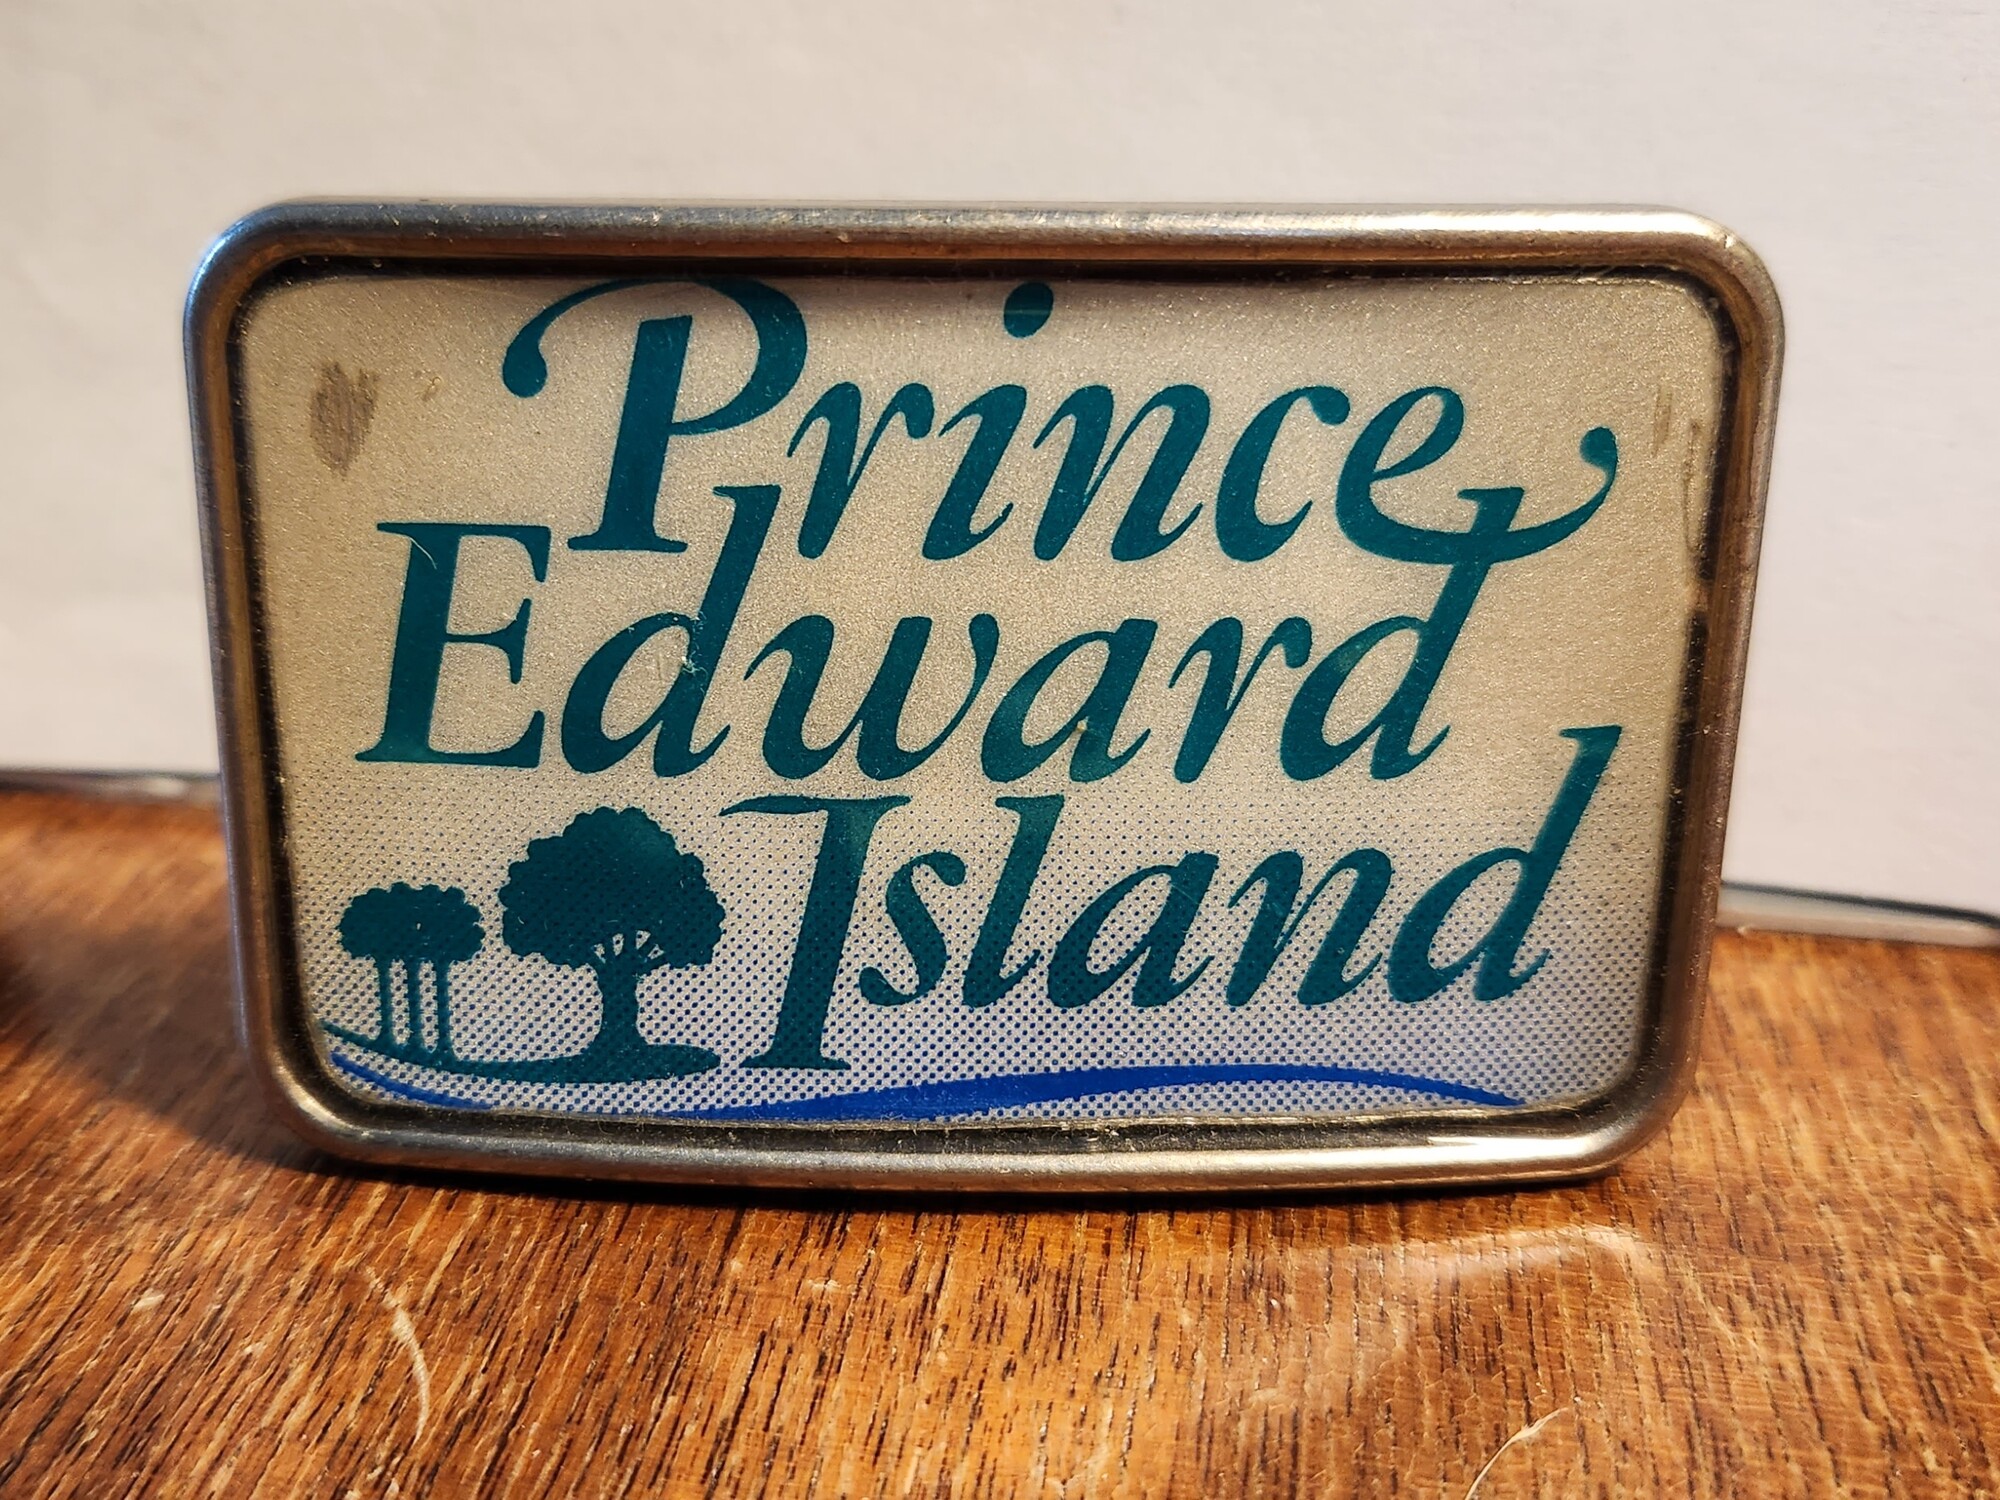 Vintage License Plates have been used to make resin filled belt buckles.
Made by a local friend 10 years ago.  These have not been used and have been stored.  They are approx. 3 x 2 and roughly 1/4 thick.
The belt opening is for a 1.5 wide belt.   They are  a one of a kind find
PLATE FROM PRICE EDWARD ISLAND